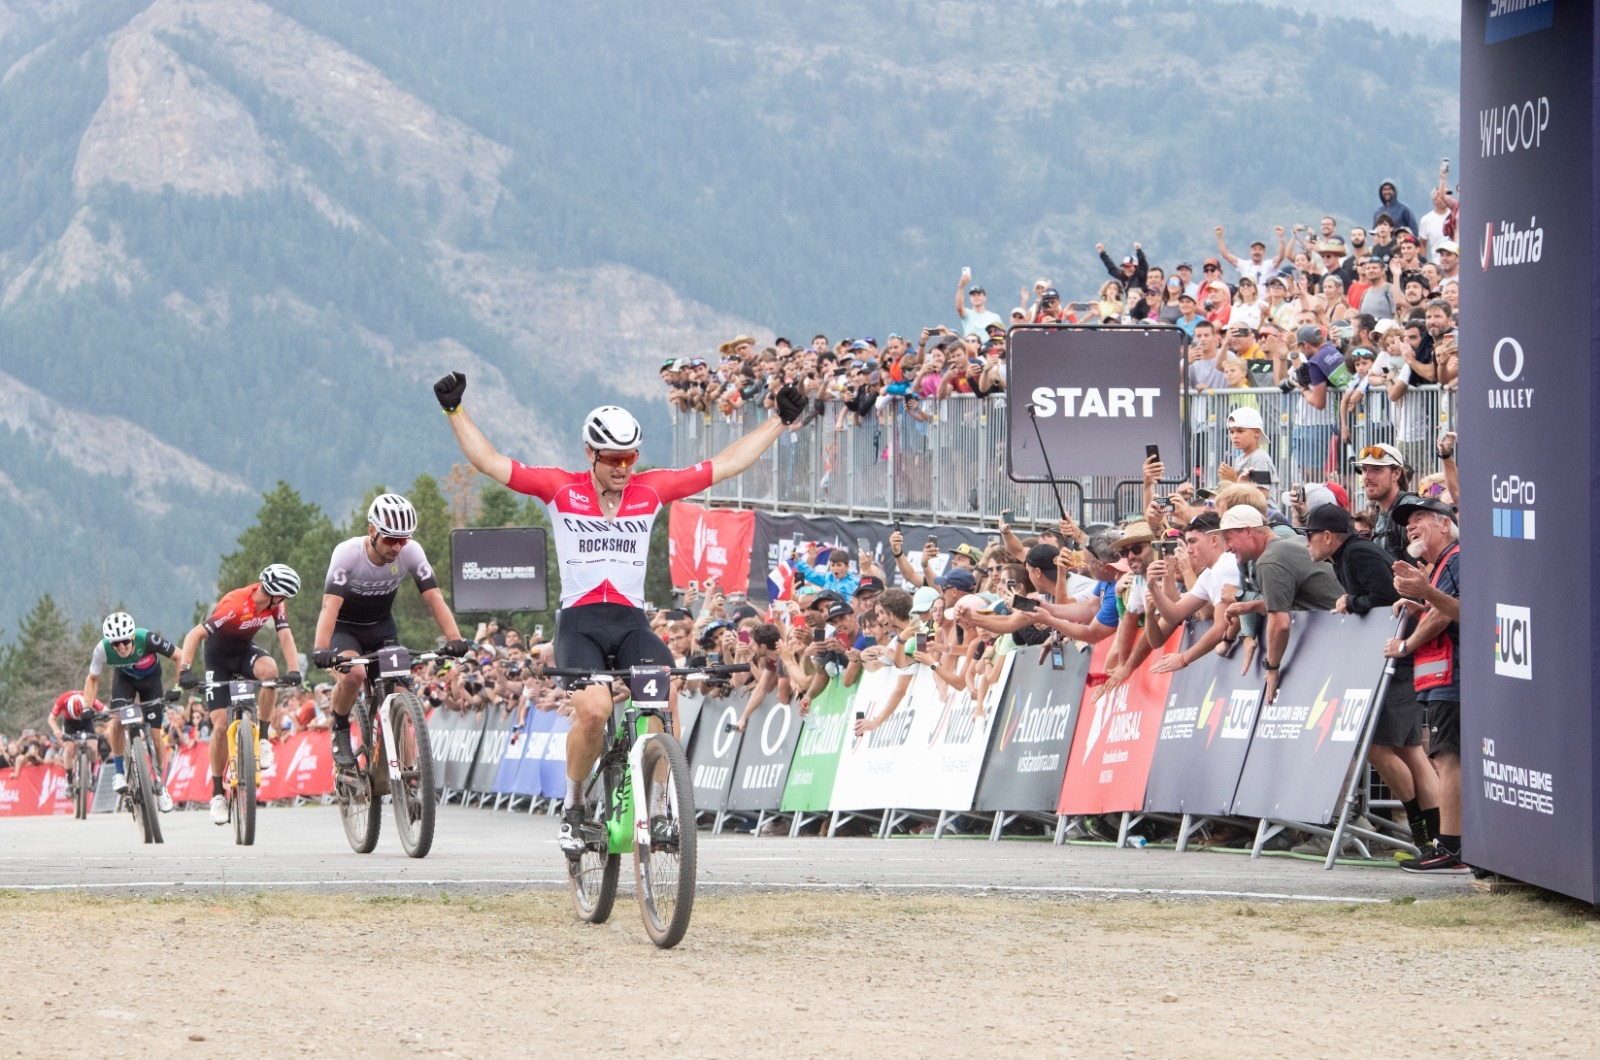 Schwarzbauer And Keller Dominate The Short Track Of The Mtb World Cup